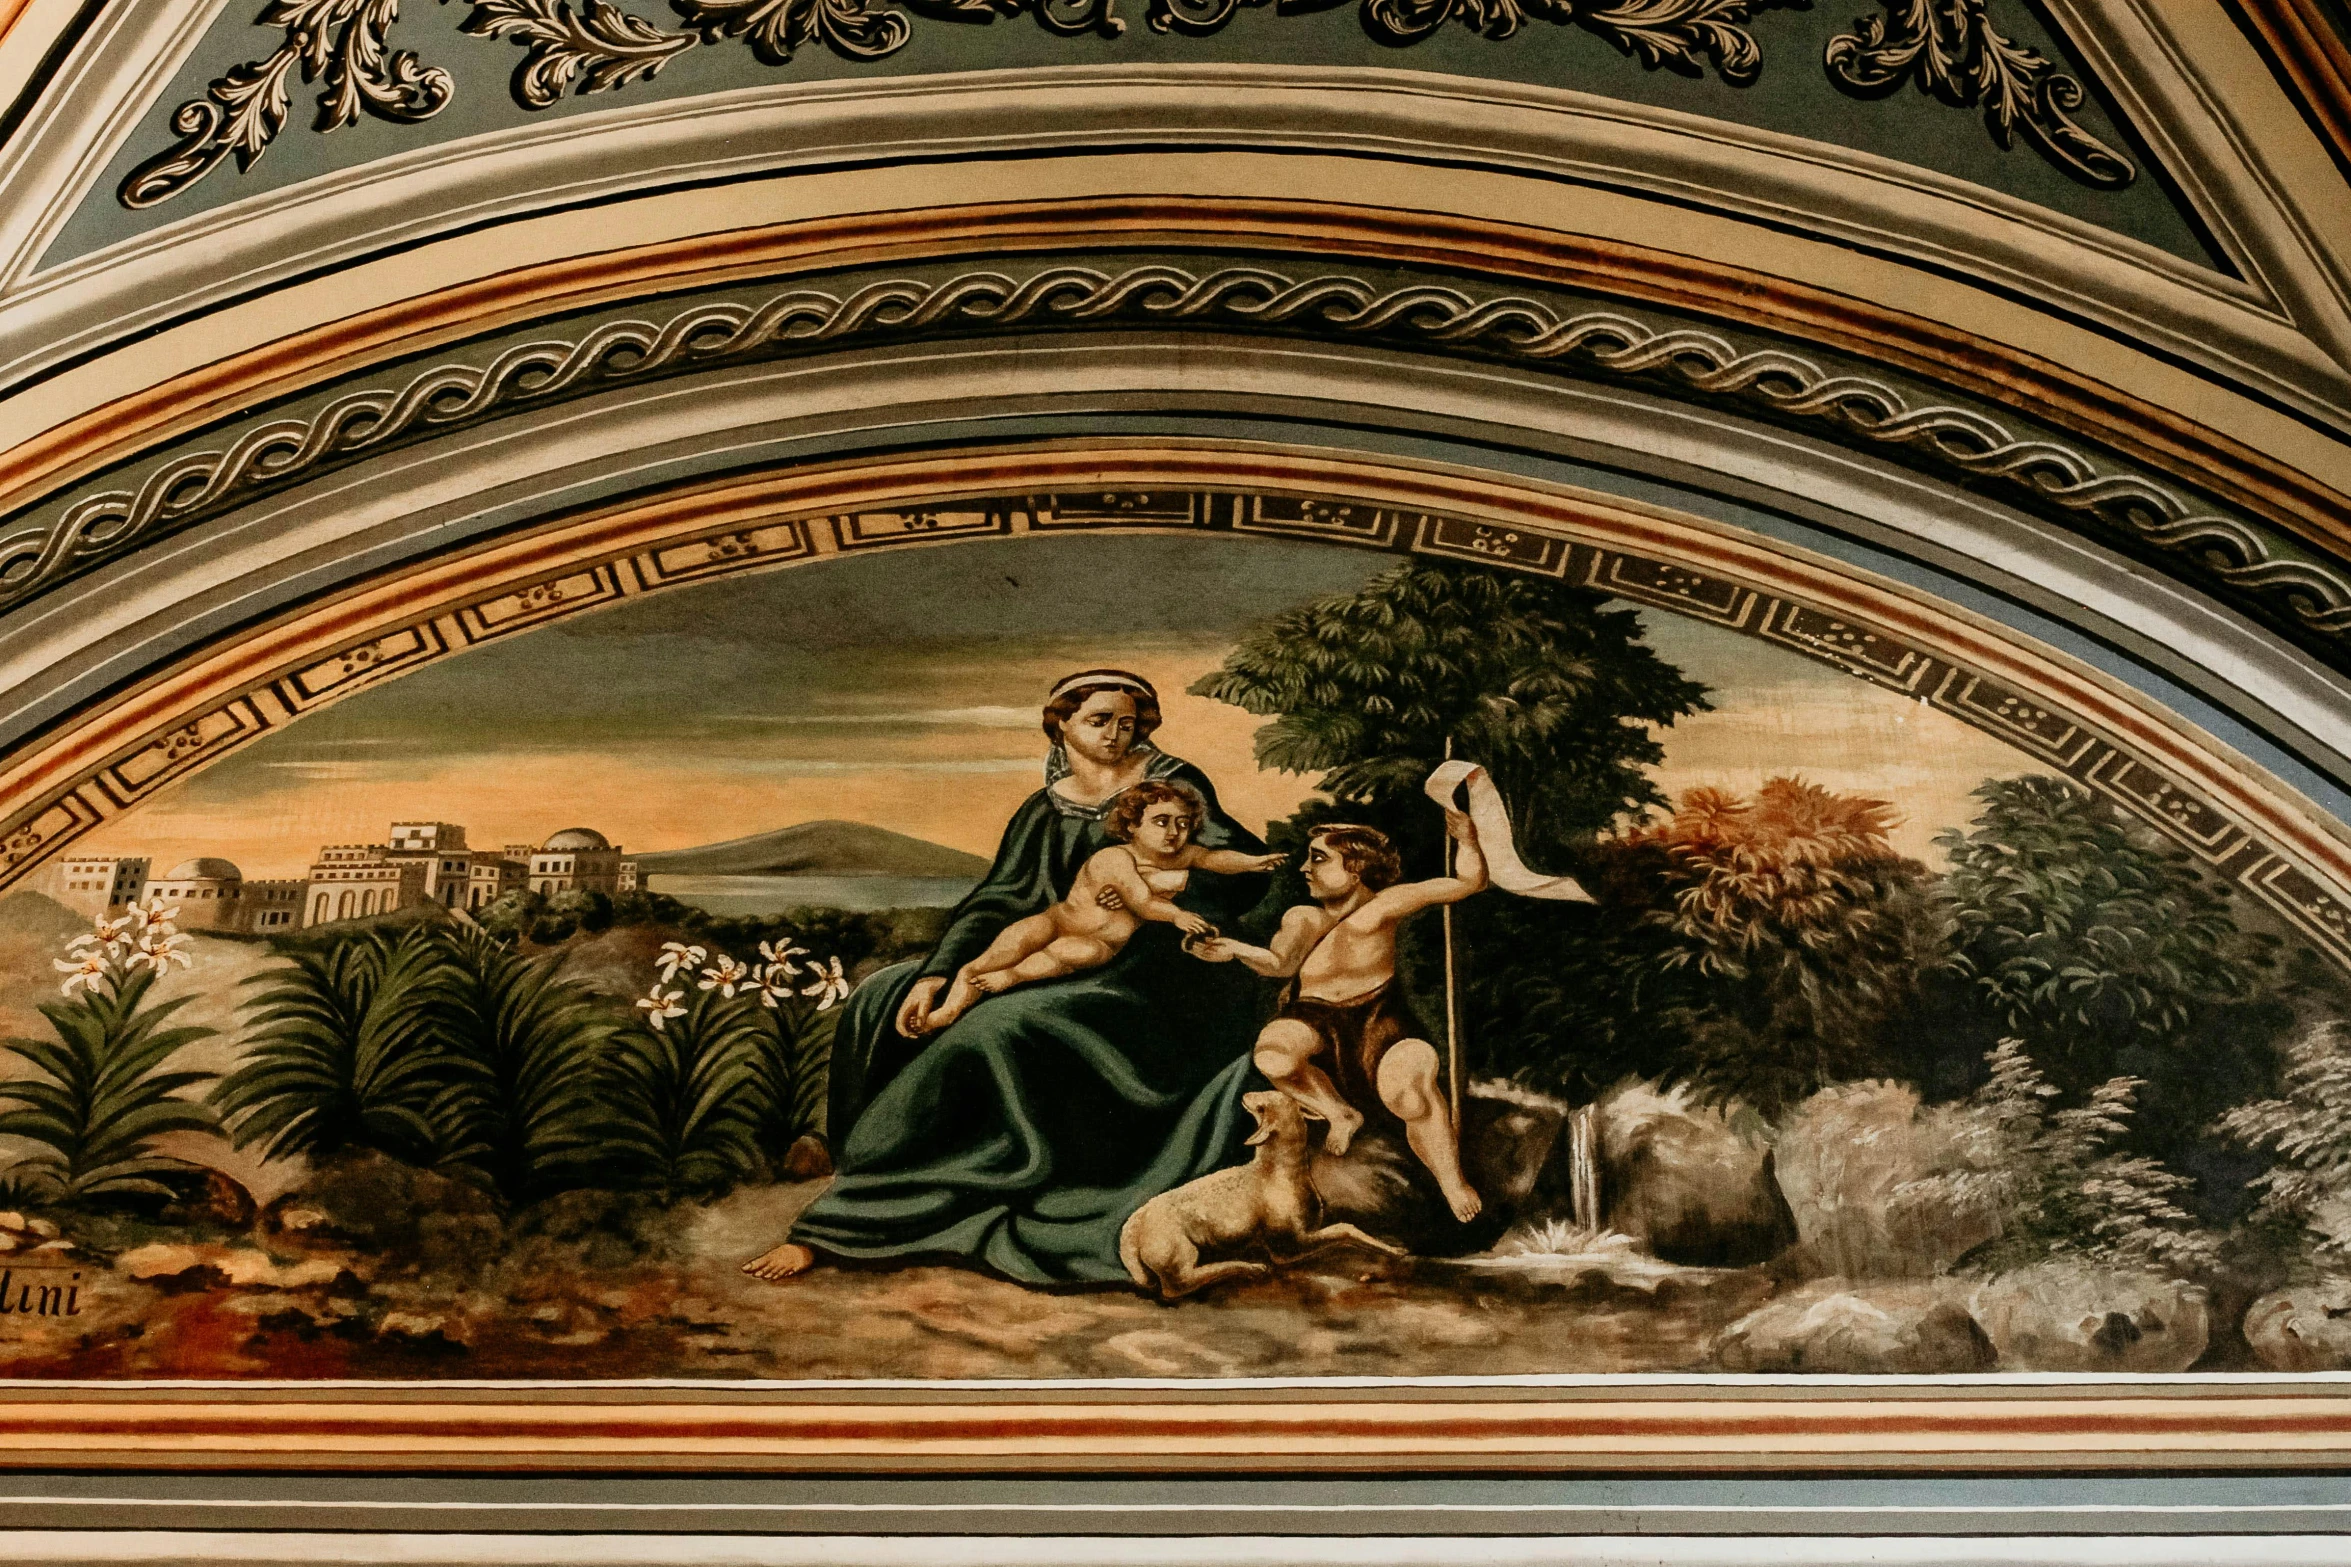 this fresco is an elegant design with artistic details